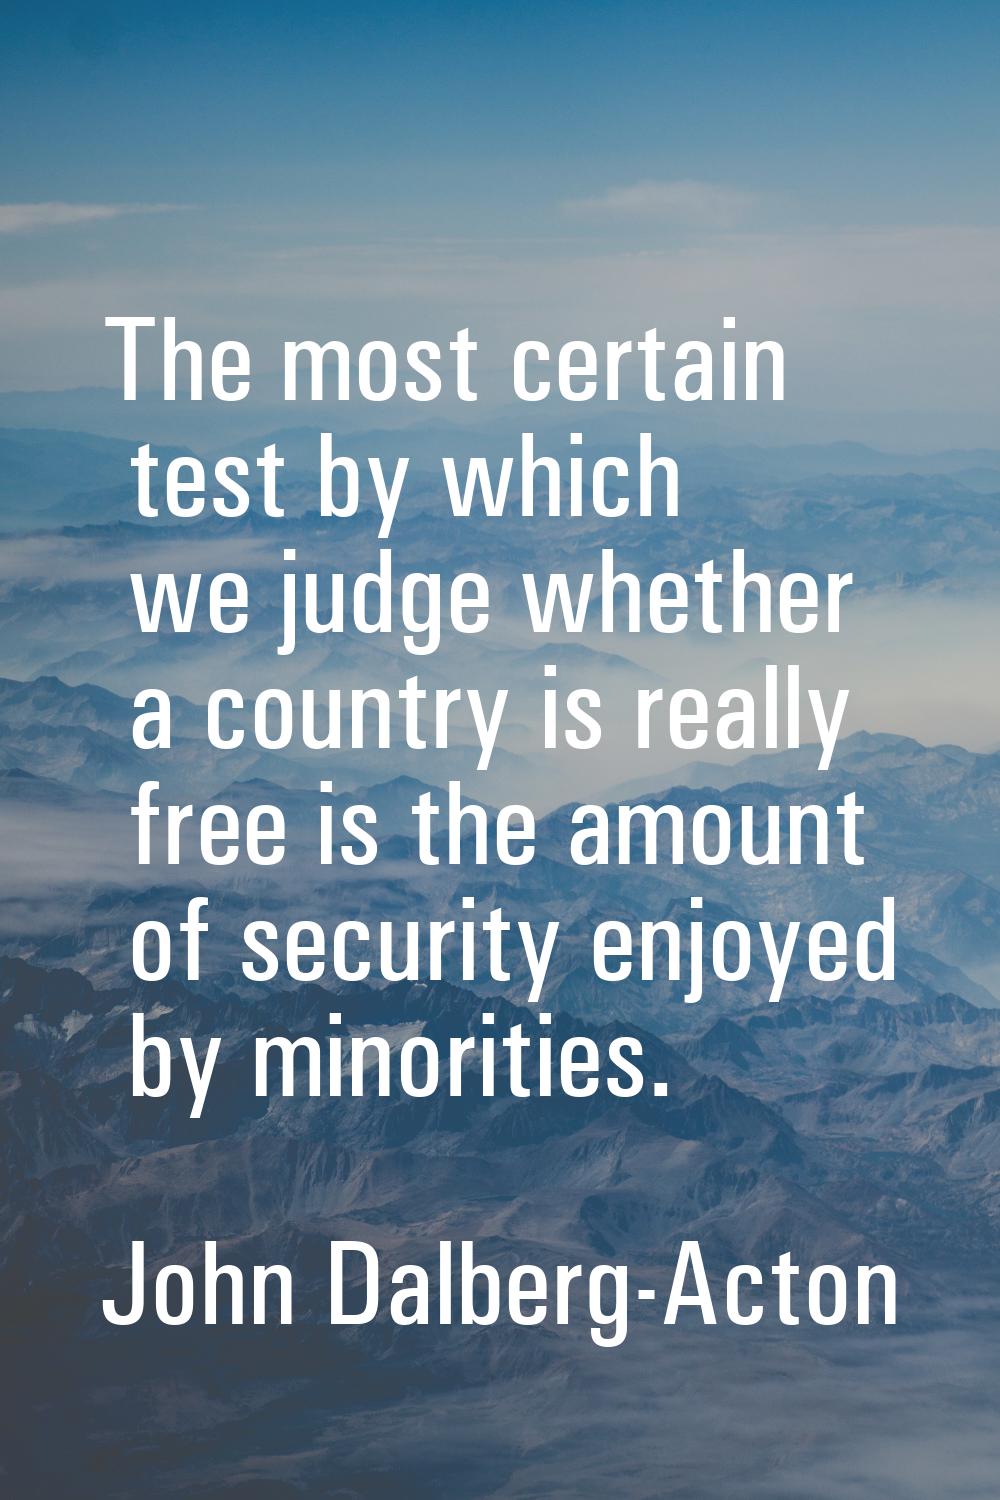 The most certain test by which we judge whether a country is really free is the amount of security 